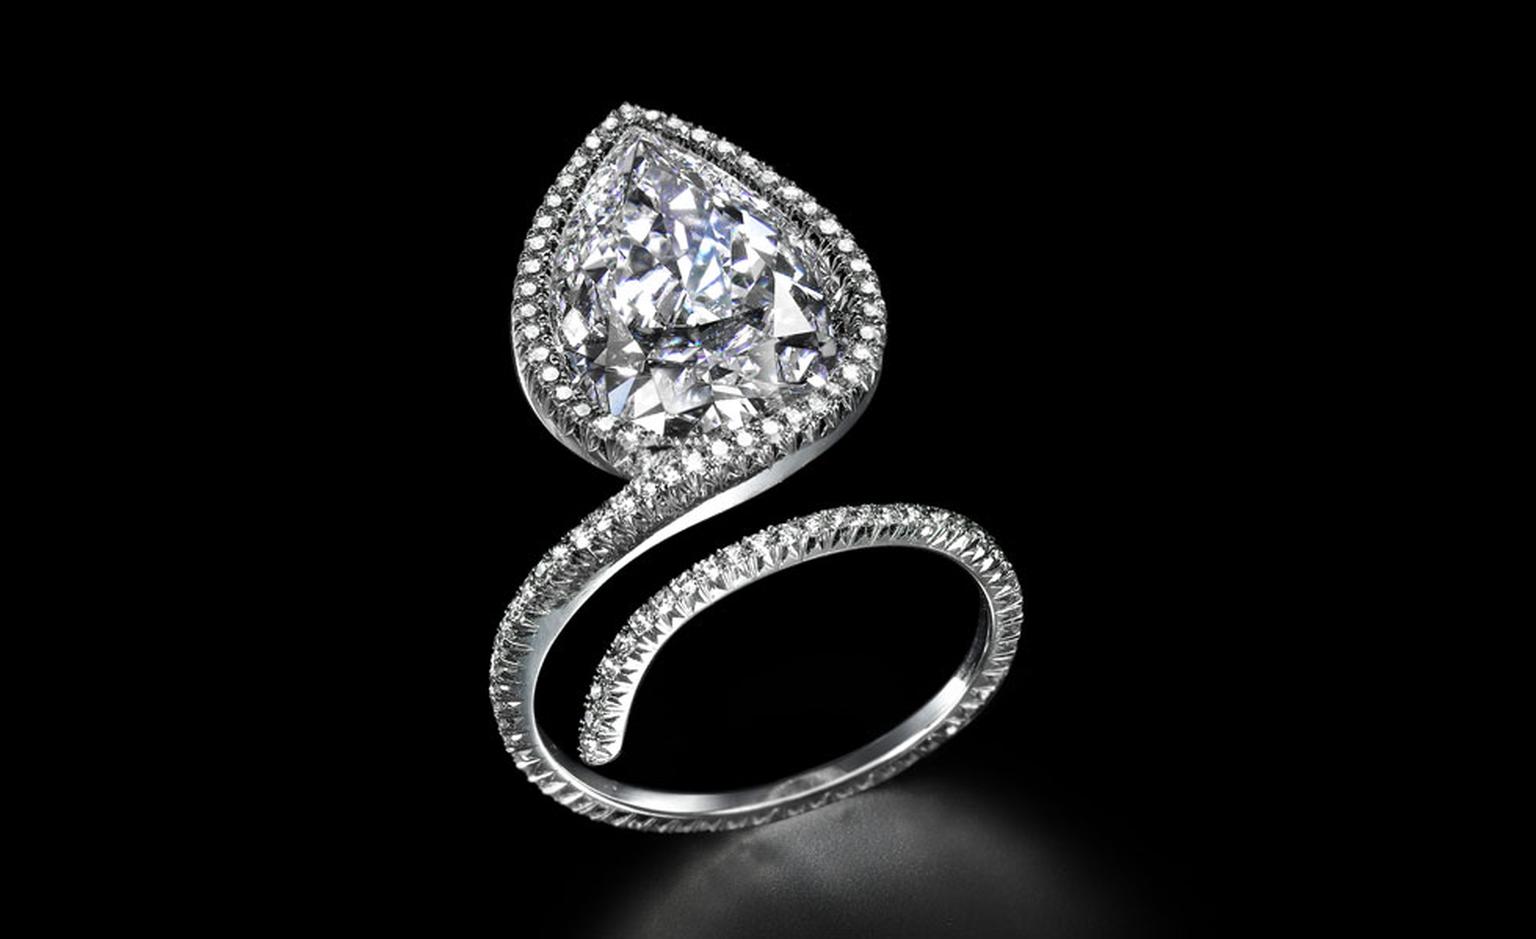 Sotheby's Diamonds ring by James de Givenchy. This ring can be worn upside down with the diamond sitting over the back of the hand.